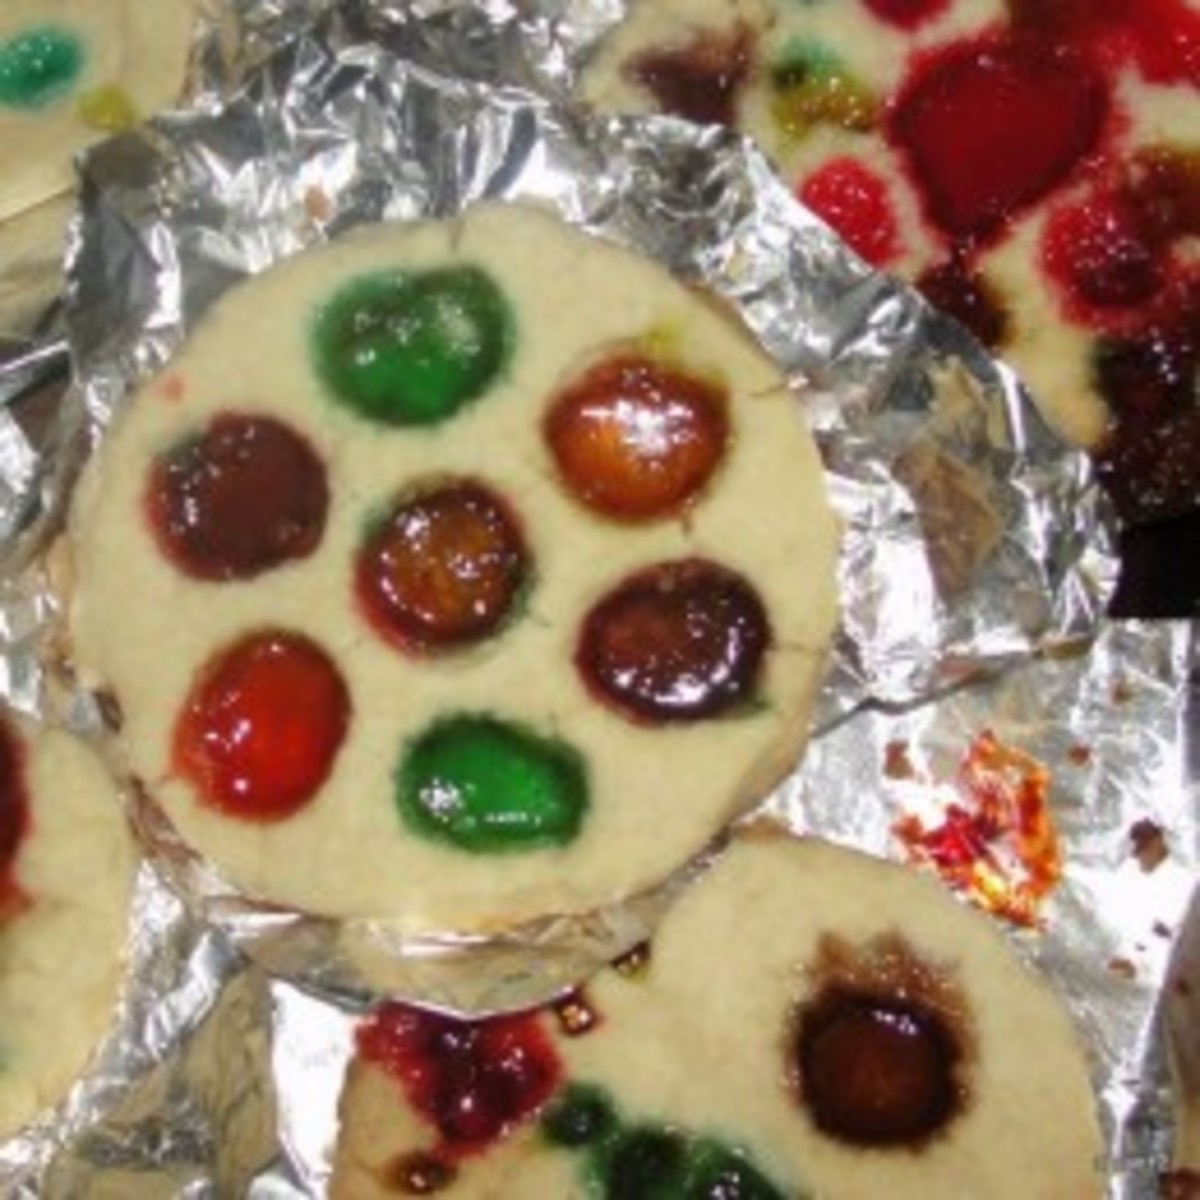 Stained glass window cookies made in the lesson on Medieval Art